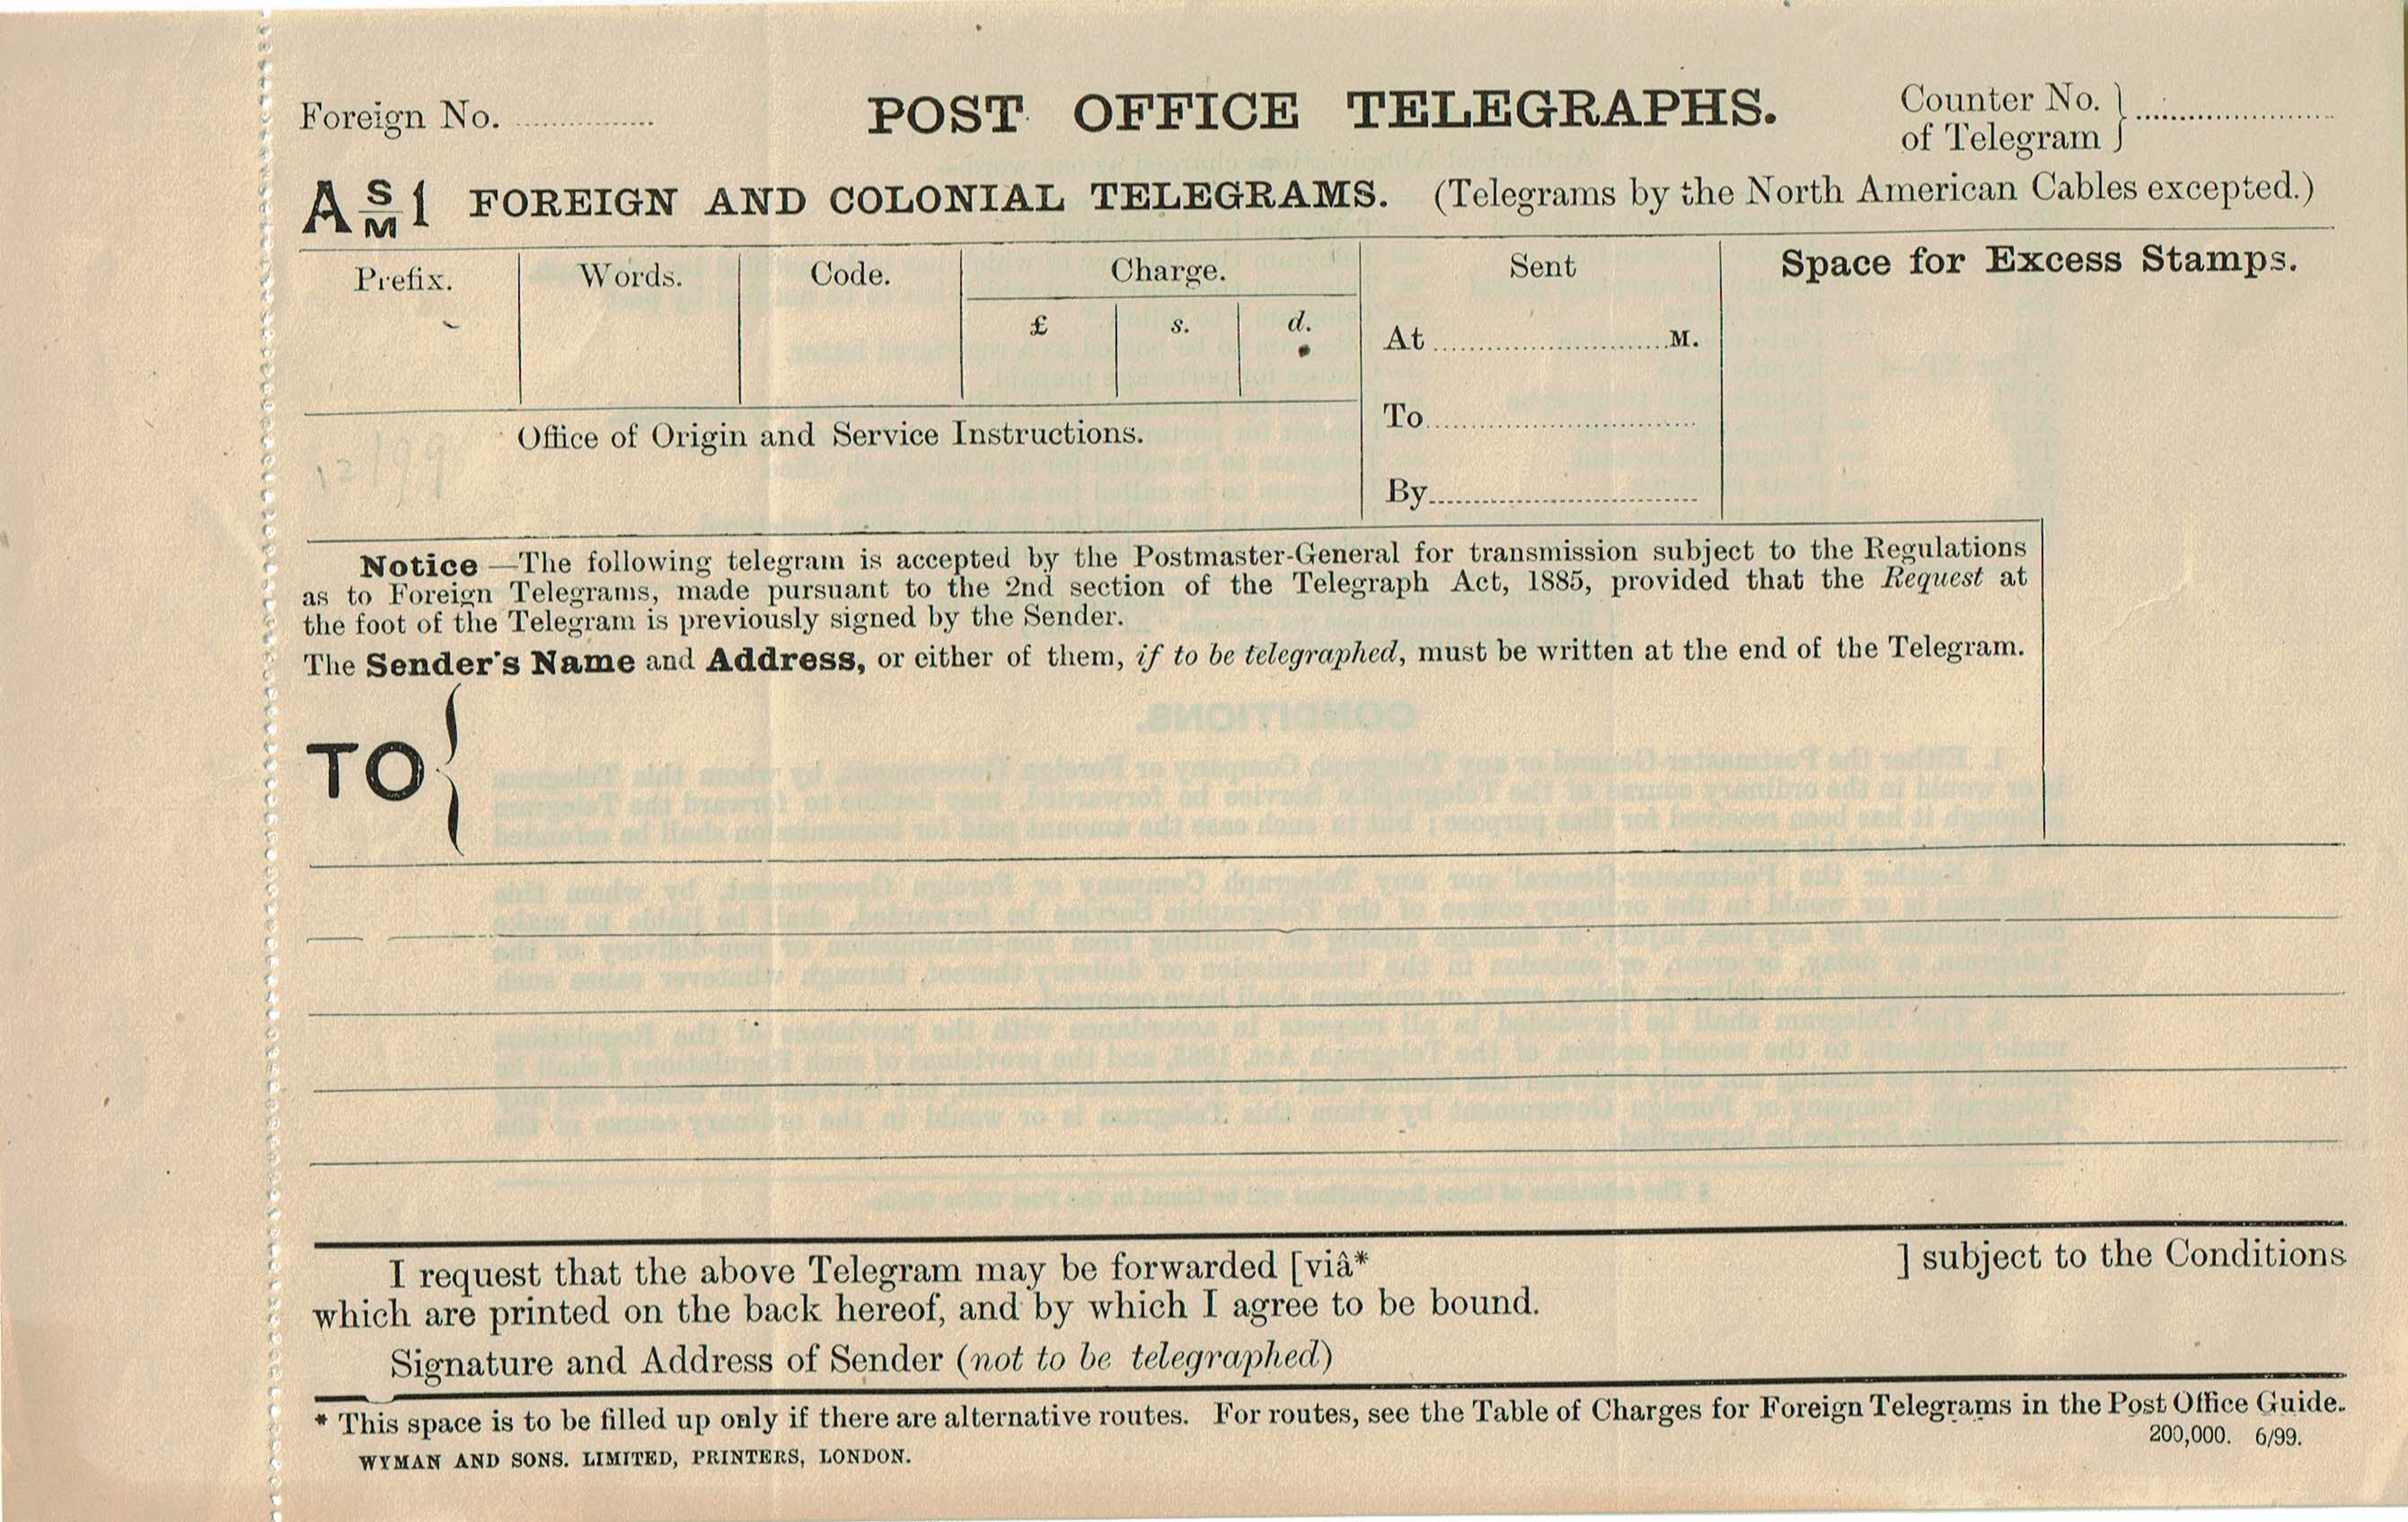 Small Forwarded Form - front